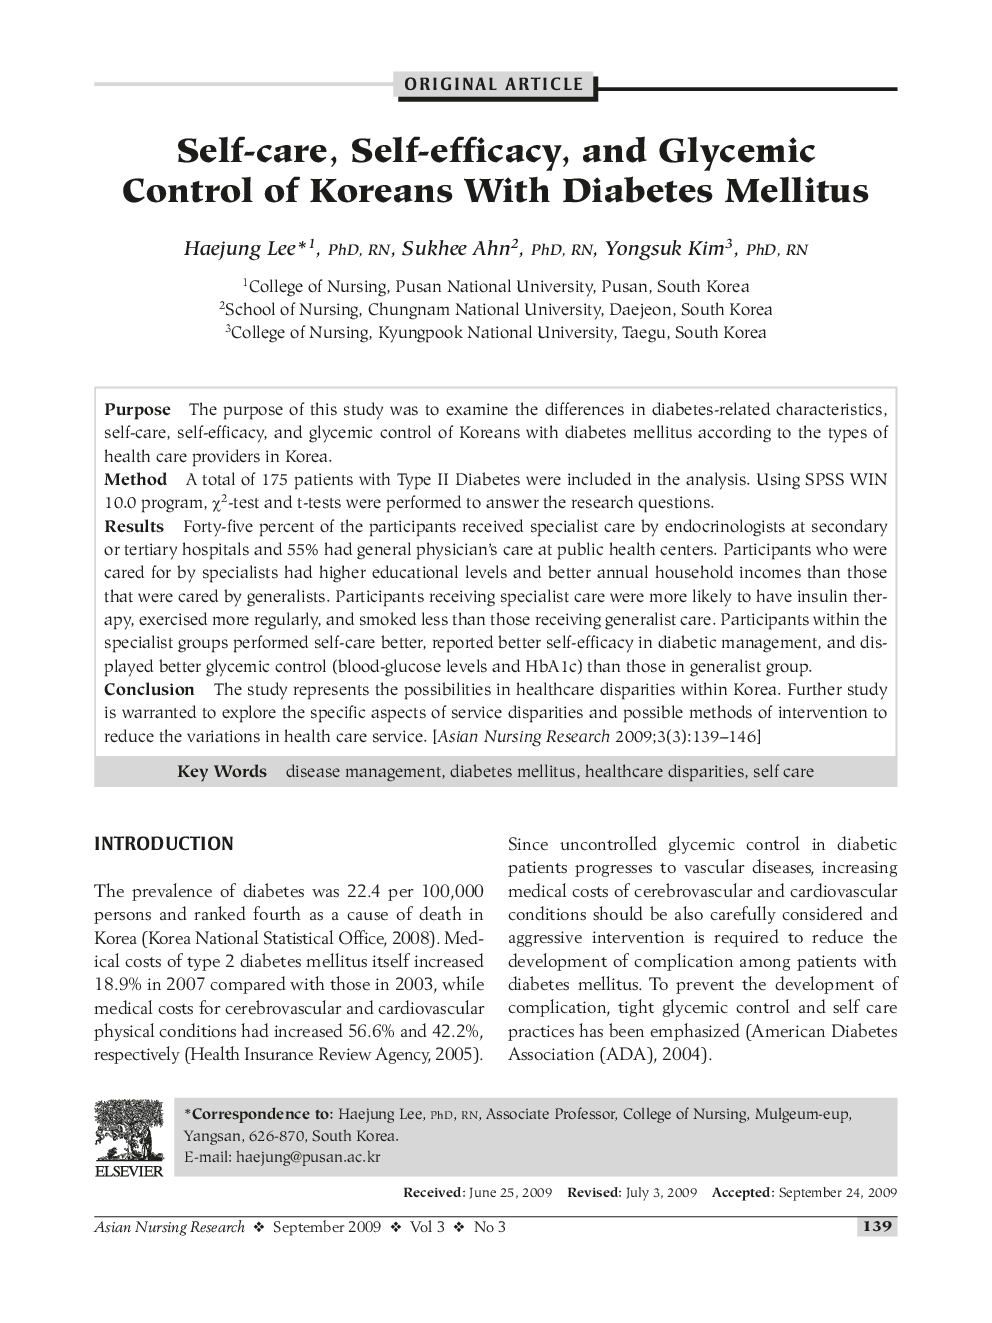 Self-care, Self-efficacy, and Glycemic Control of Koreans With Diabetes Mellitus